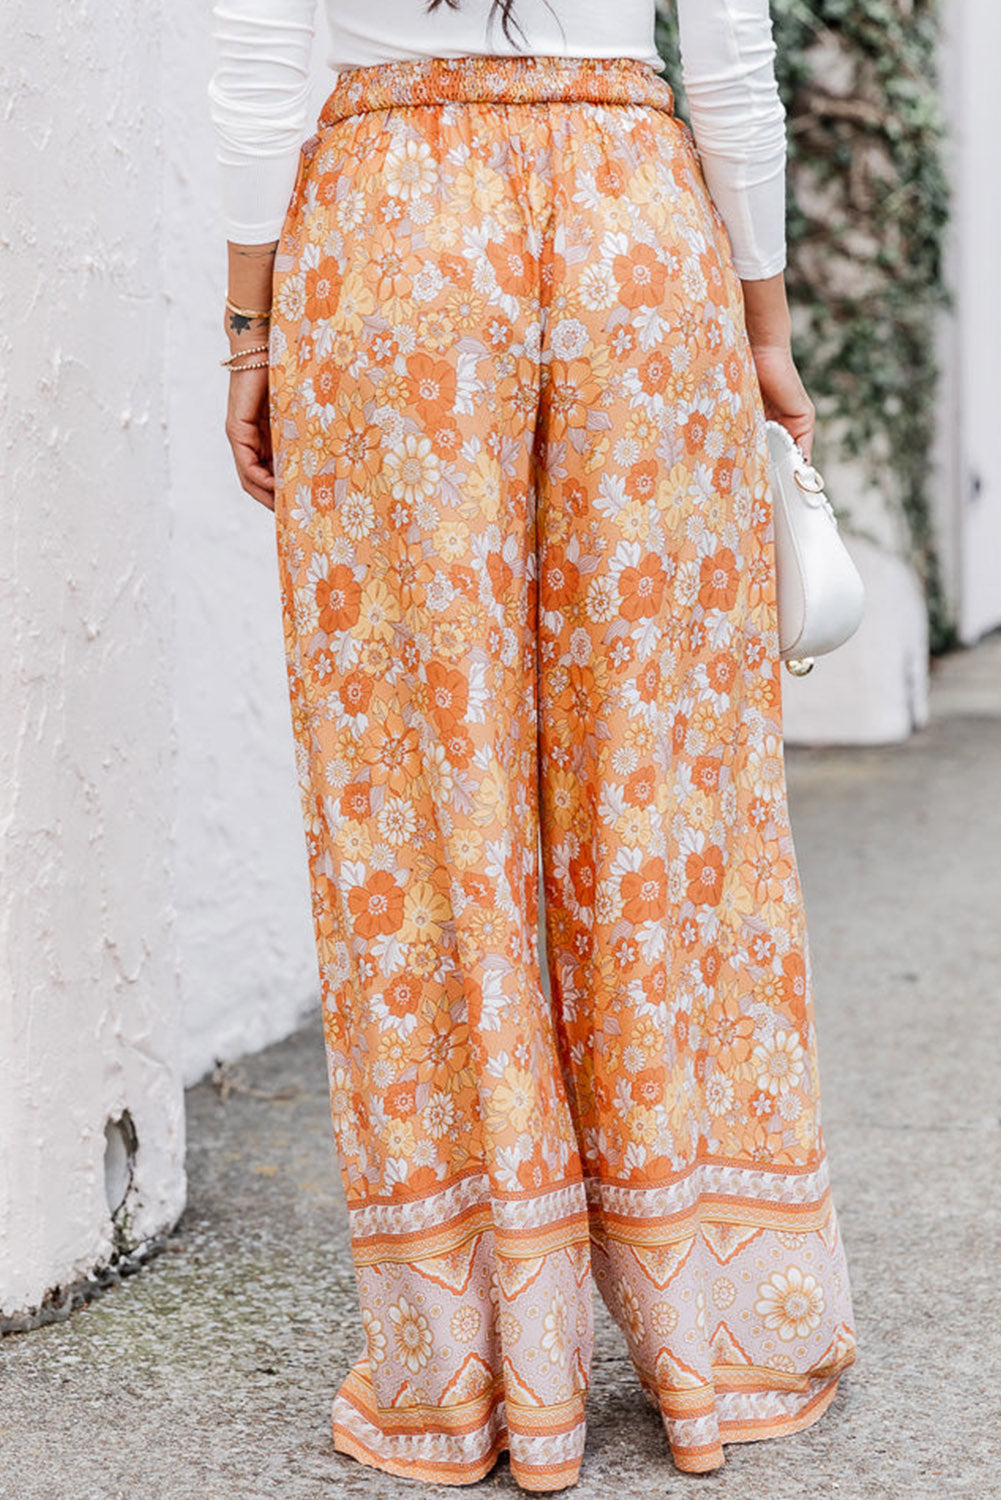 The802Gypsy  Bottoms TRAVELING GYPSY-Tie Waist Boho Floral Wide Leg Pants